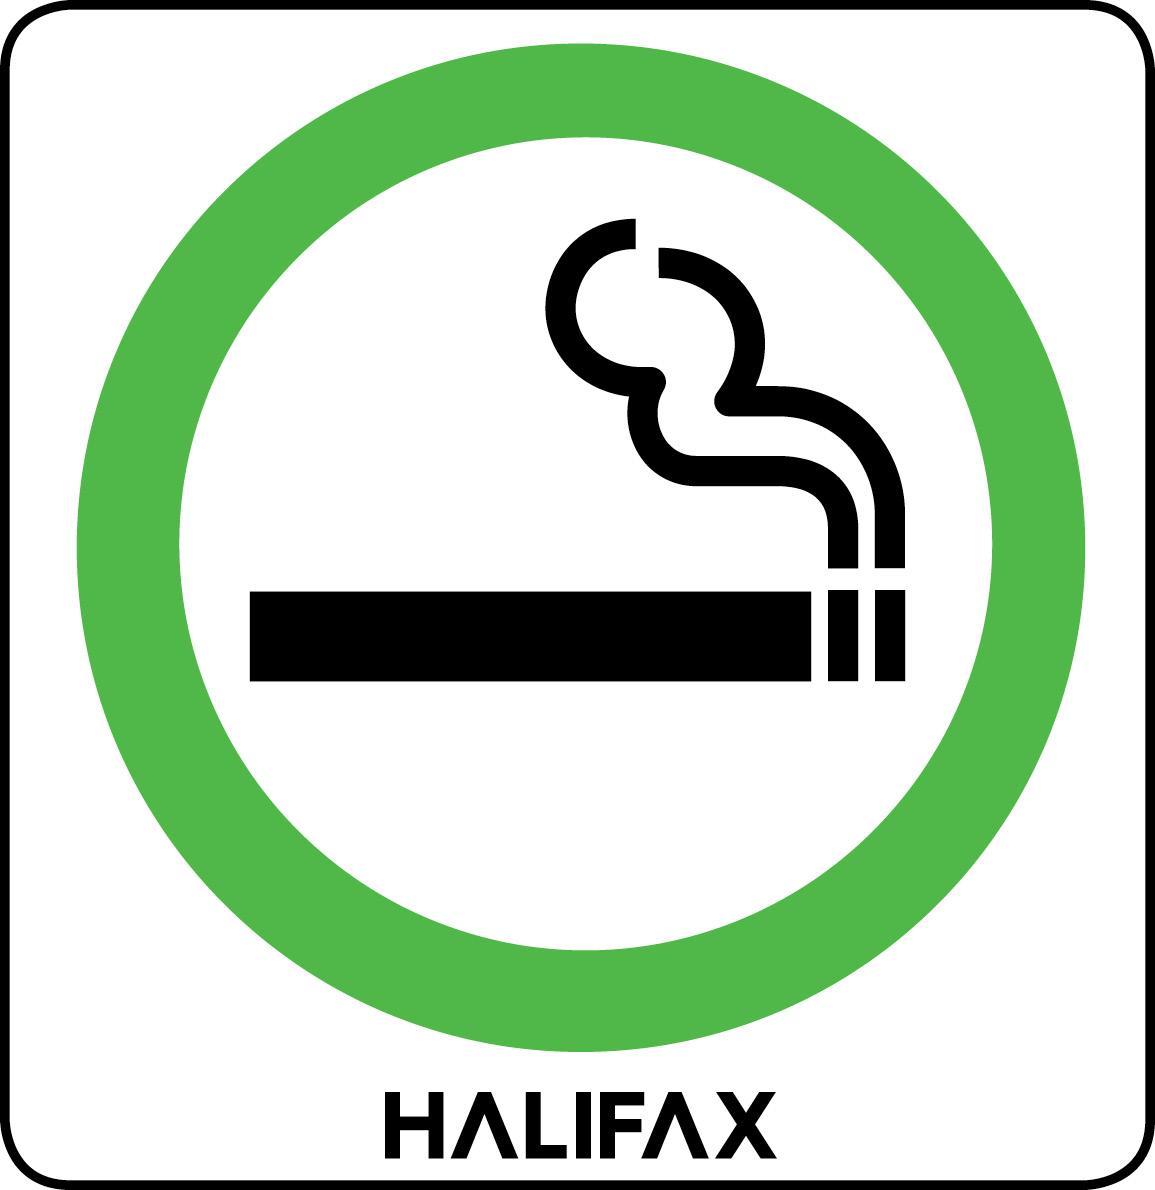 A sign with a green circle and an icon of a smoking apparatus is shown